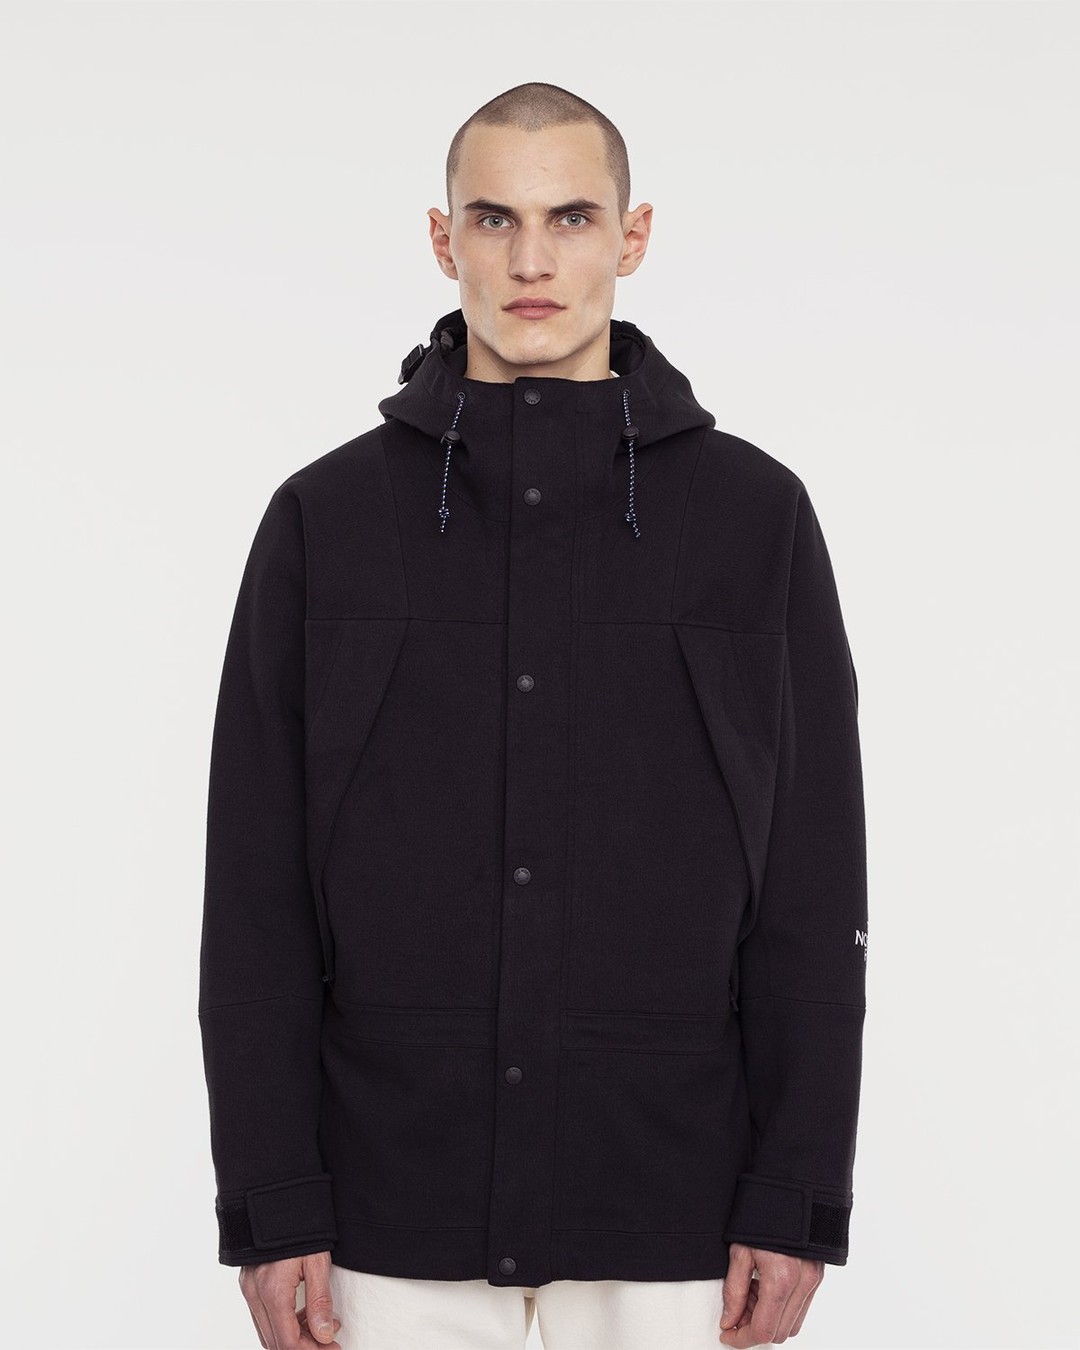 The North Face – Black Series Spacer Knit Mountain Light Jacket Black - Outerwear - Black - Image 2